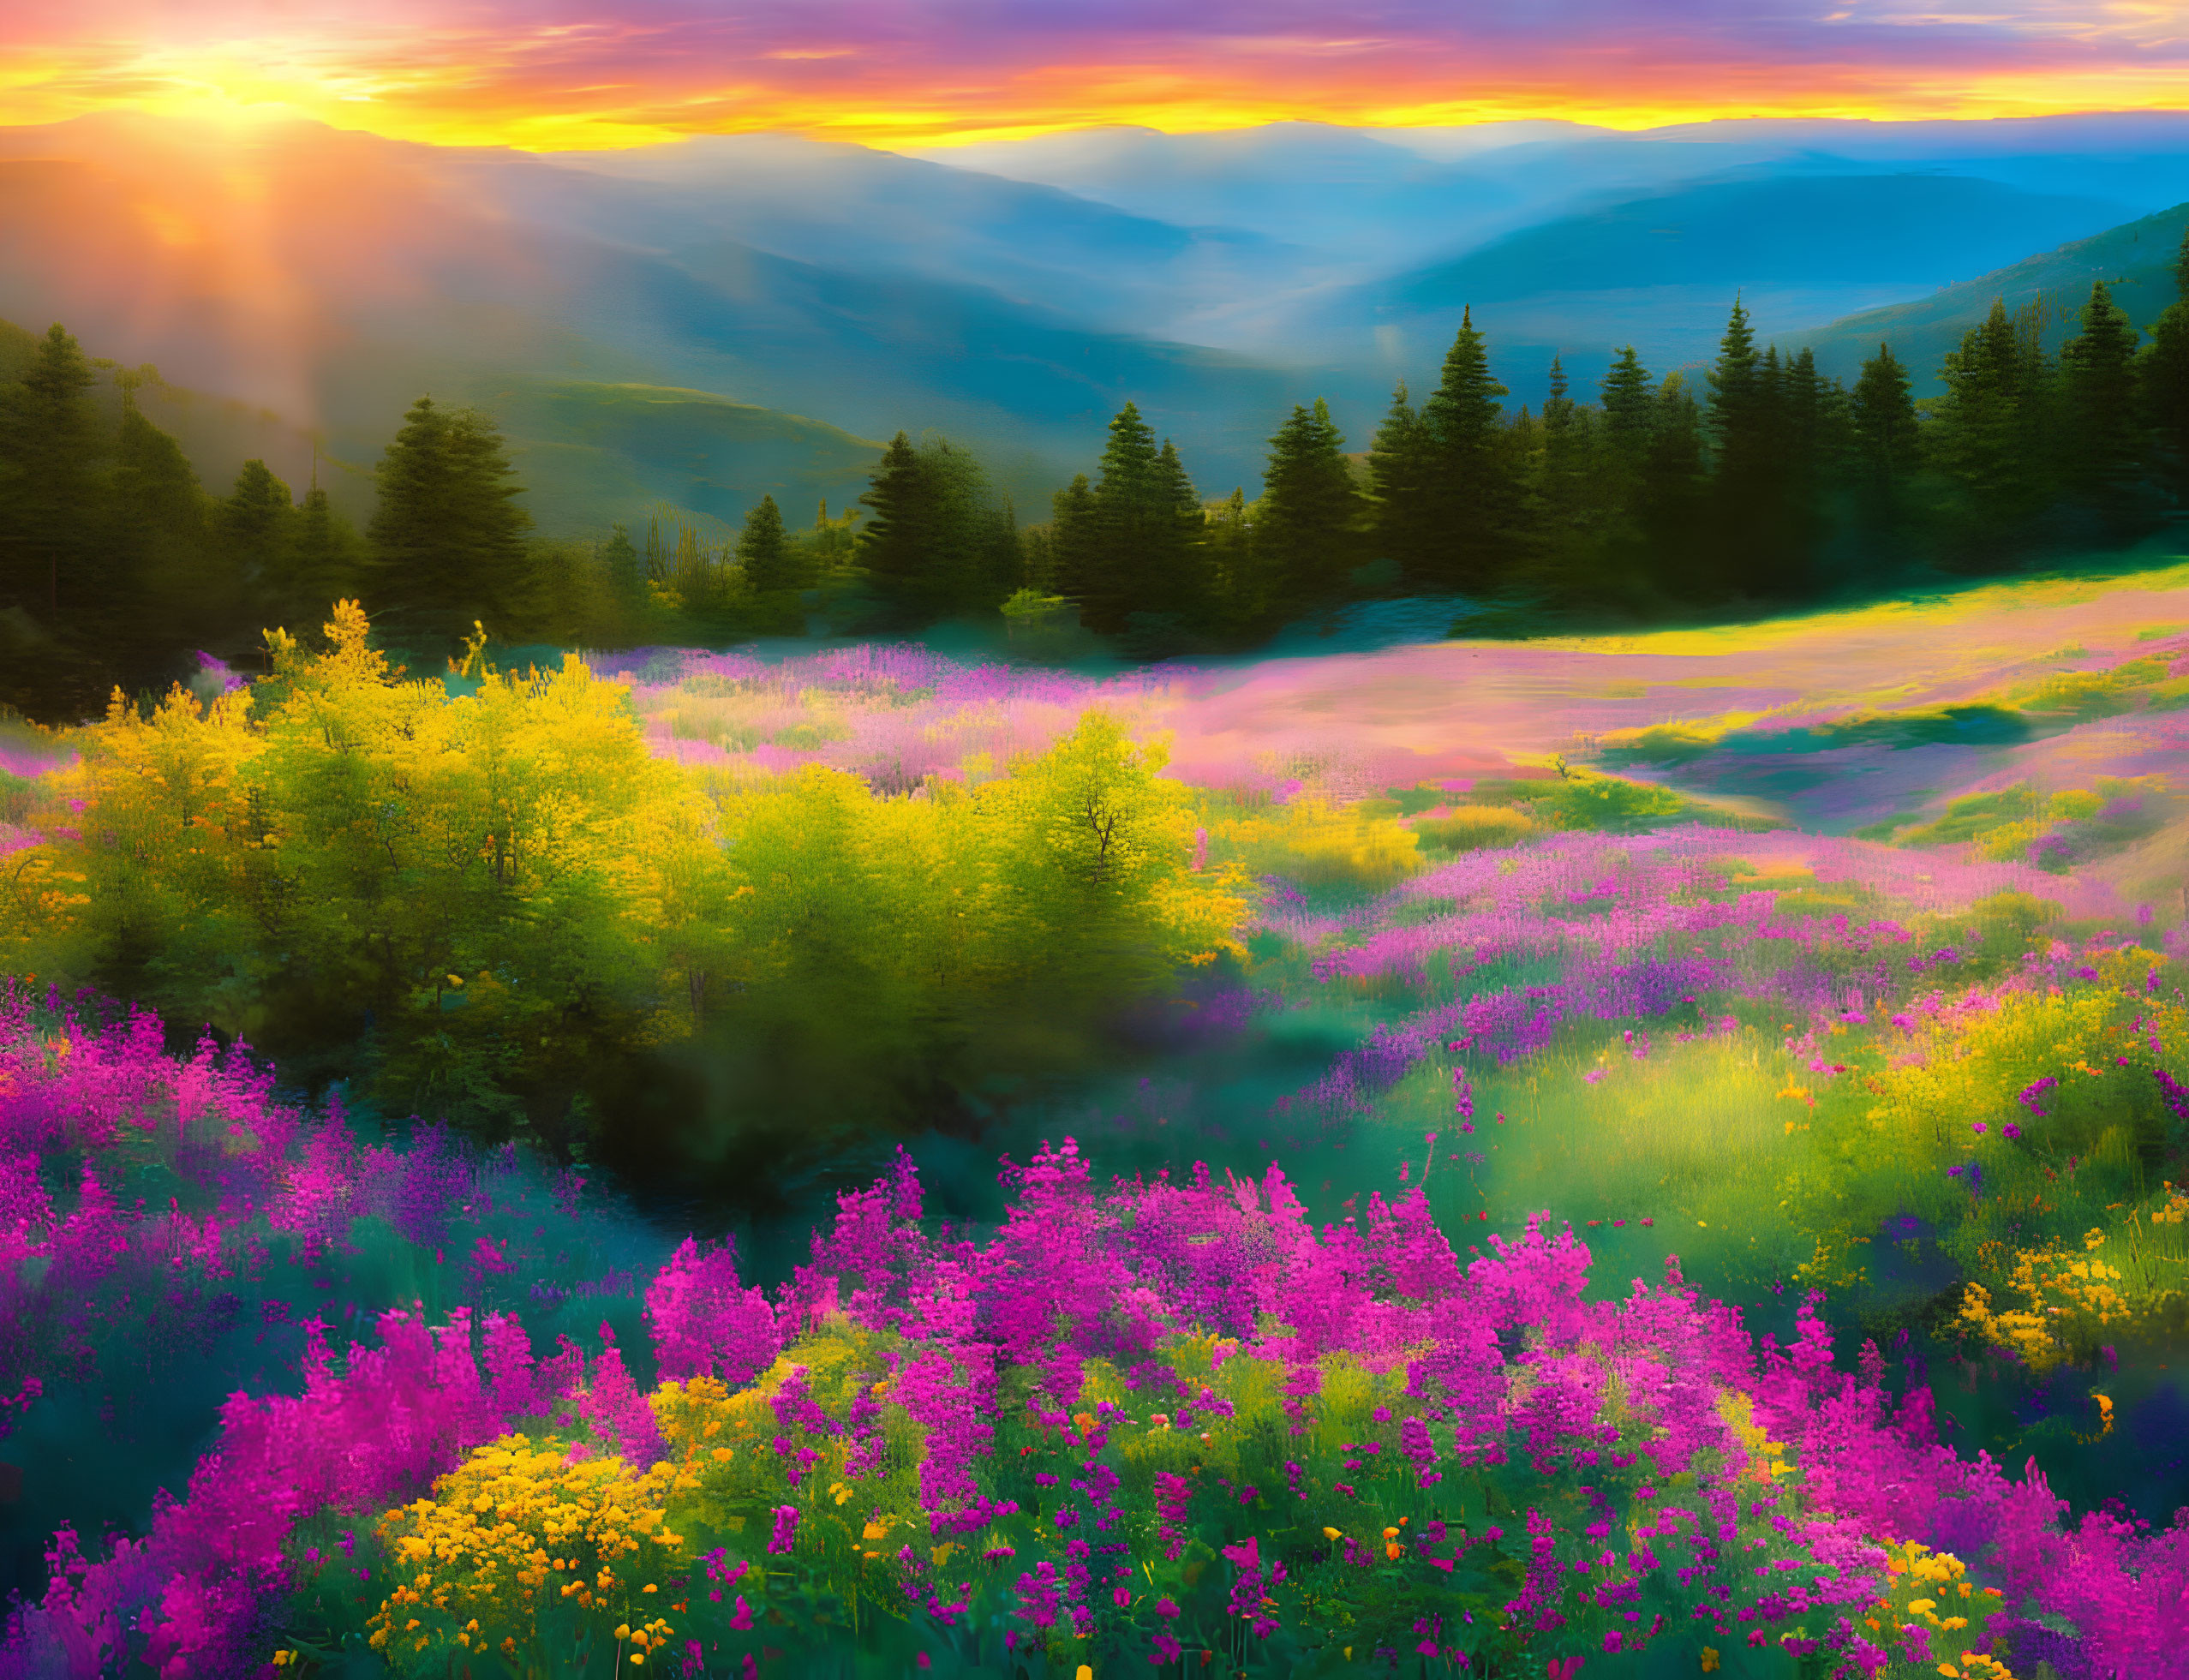 Scenic sunrise over lush mountain landscape with blooming wildflowers